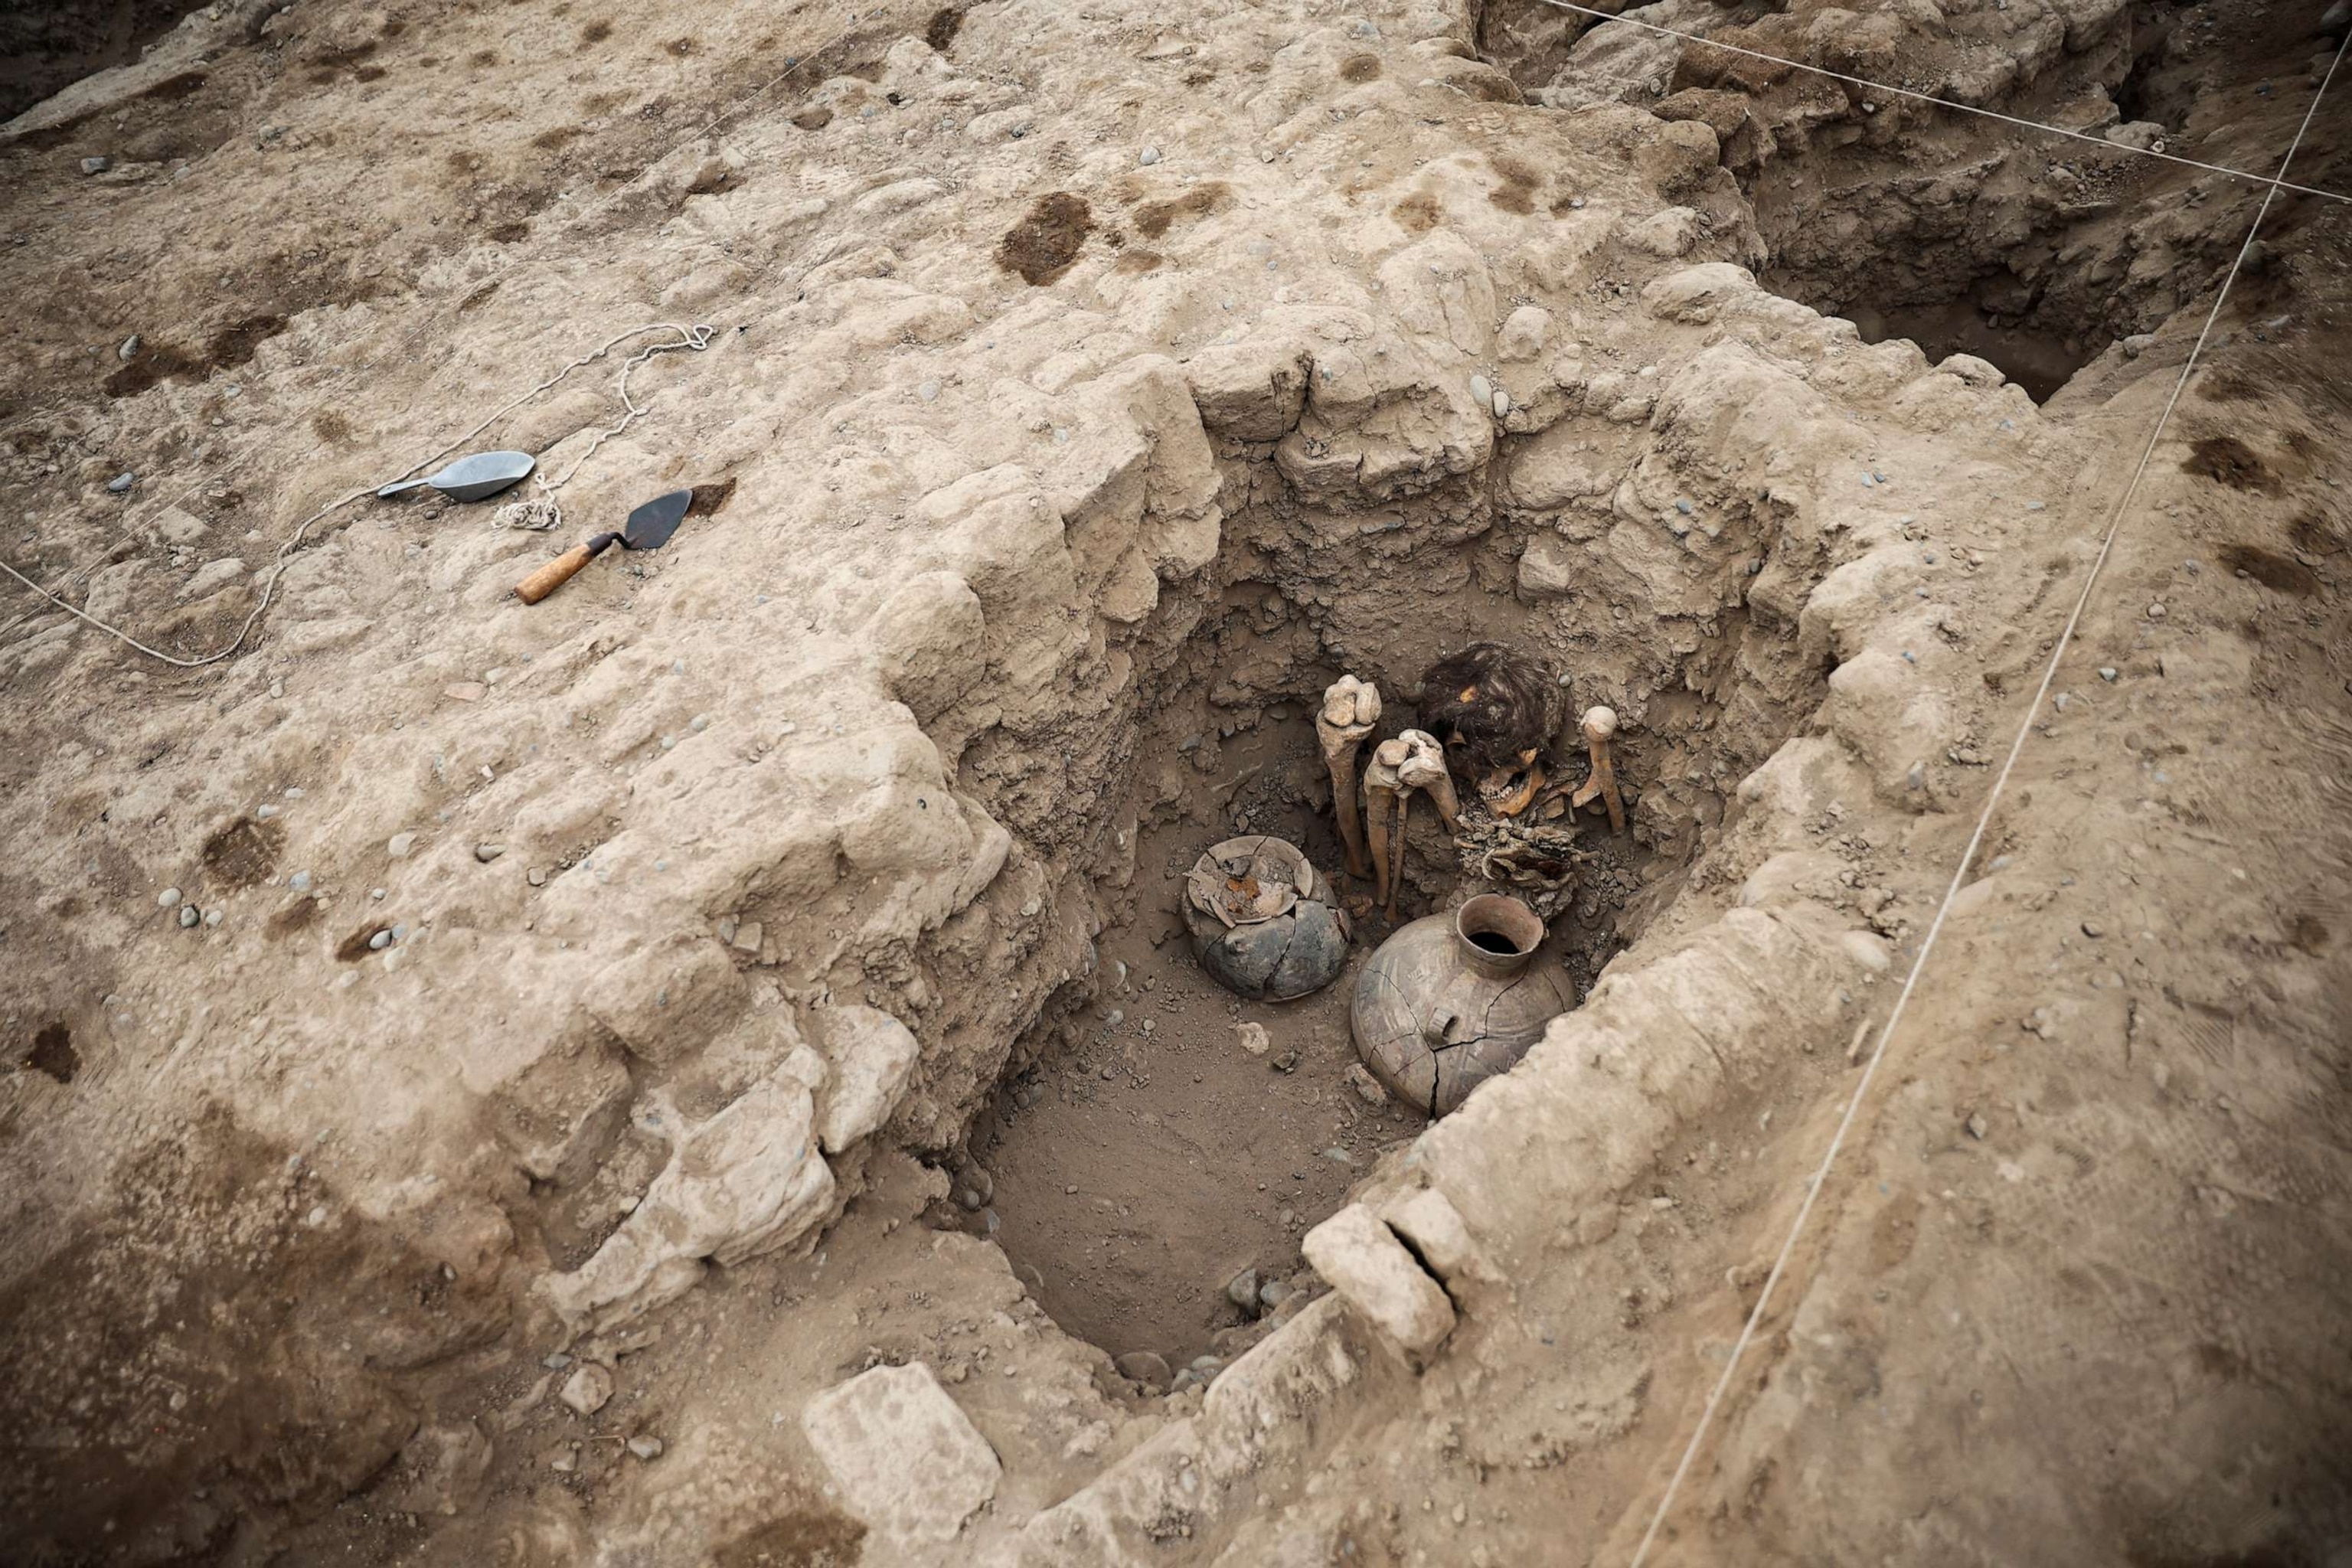 Archaeologists discover 1,000-year-old mummy in Peru - ABC News